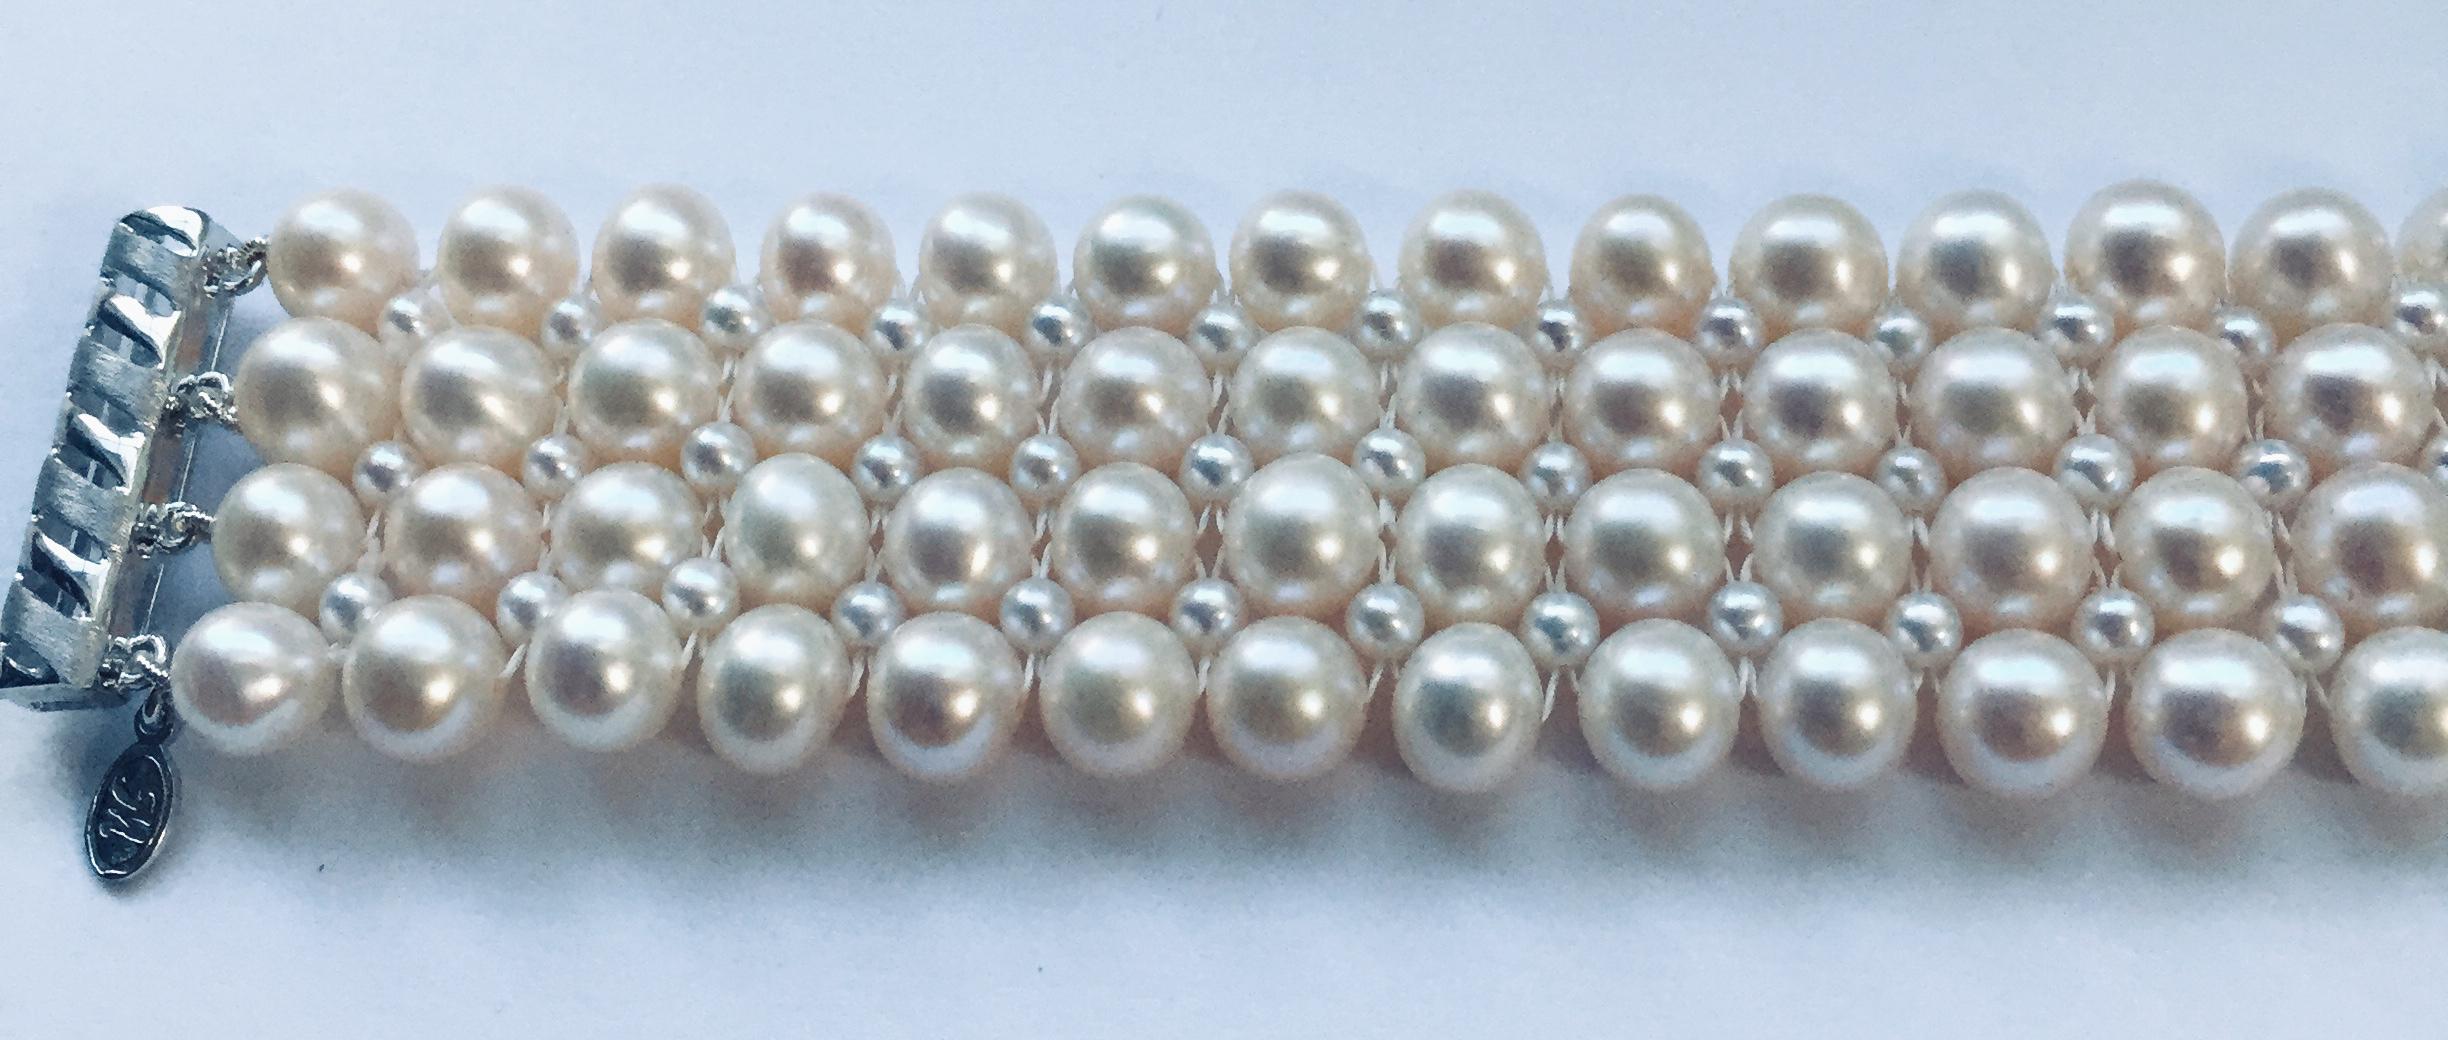 Bead Marina J. Hand-Woven Pearl Bracelet with 14 Karat White Gold Plated Clasp